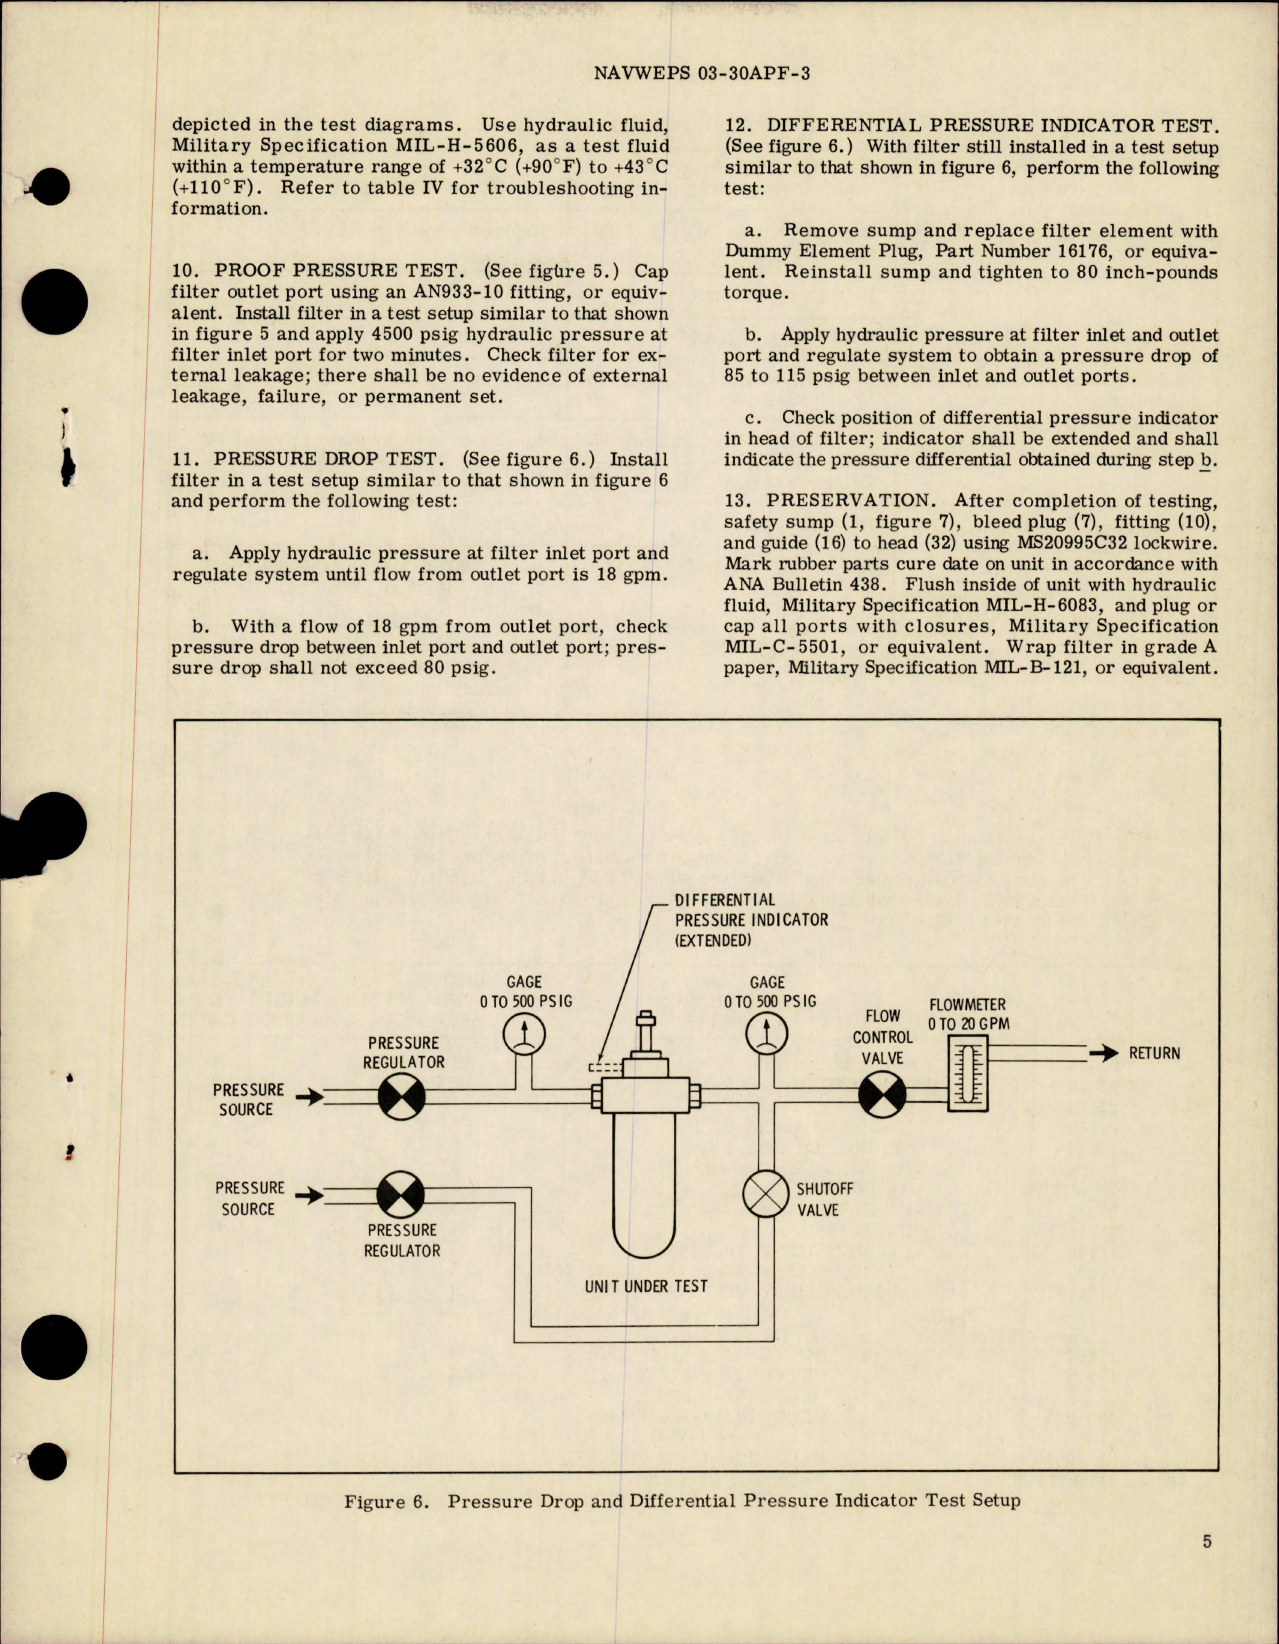 Sample page 5 from AirCorps Library document: Overhaul Instructions with Parts for Hydraulic High Pressure Filters - Parts 22010-1 and 22010-1A 